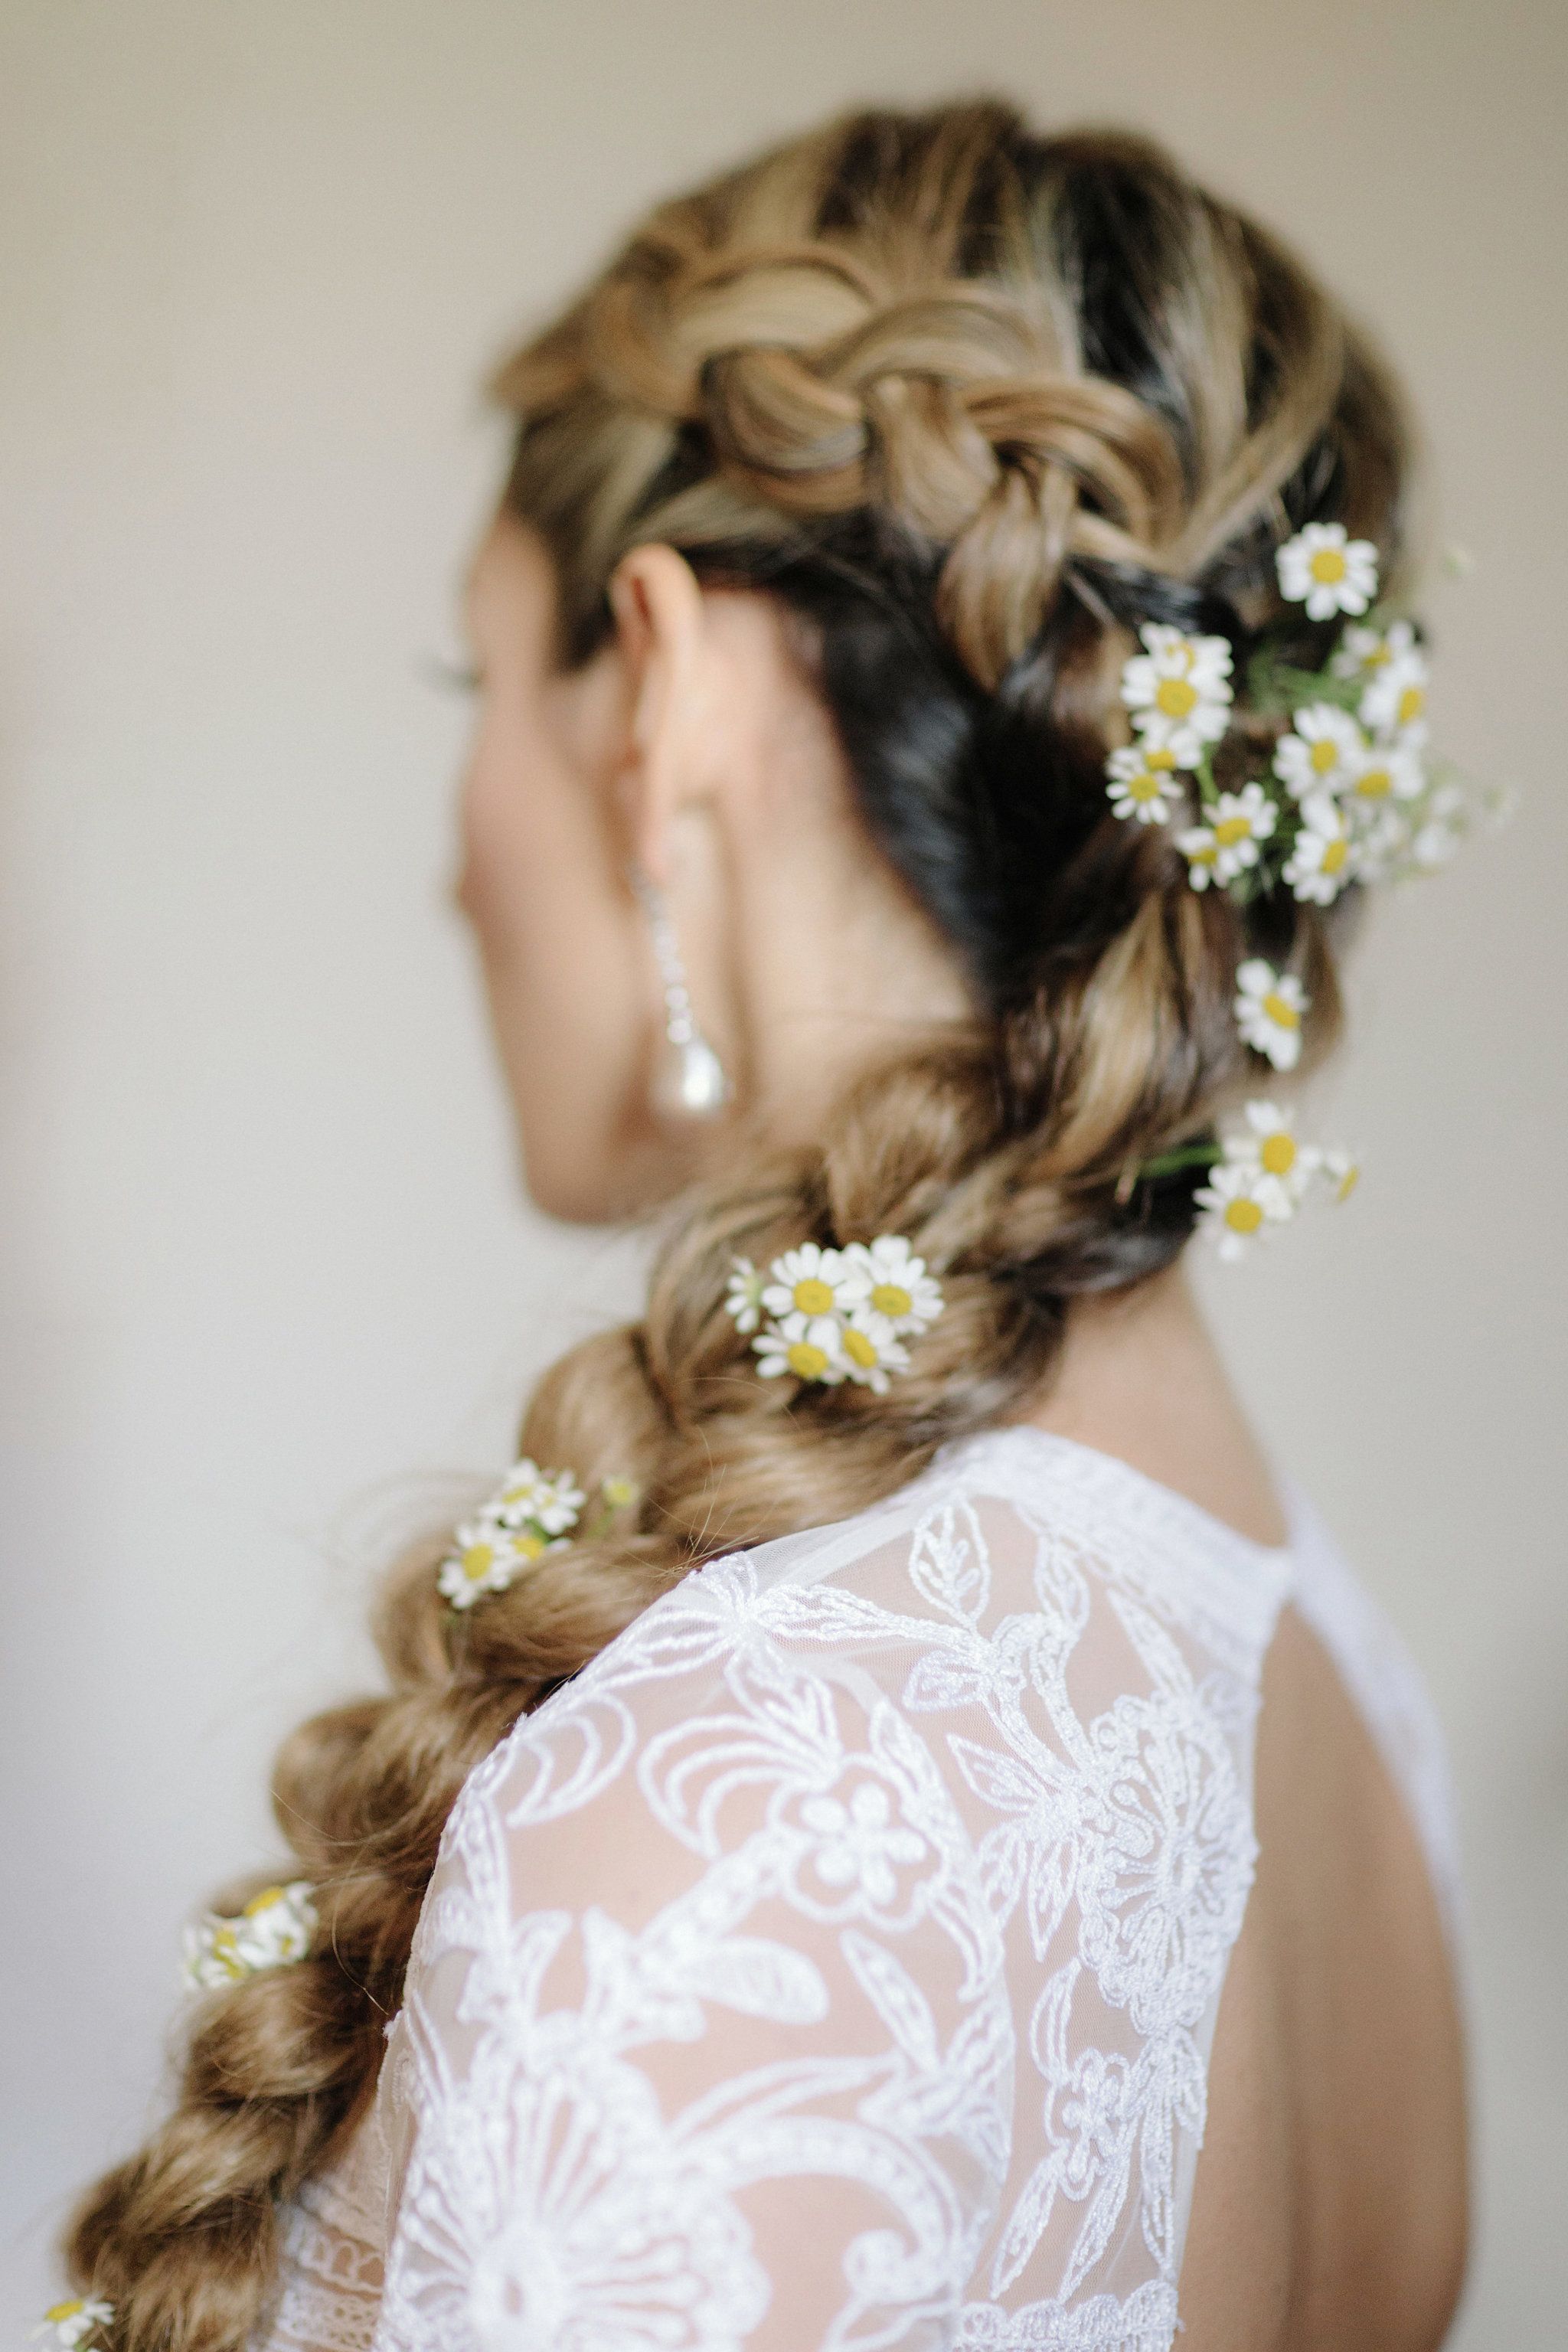 15 Beautiful Flower Braid Hairstyles You Should Try | Styles At Life